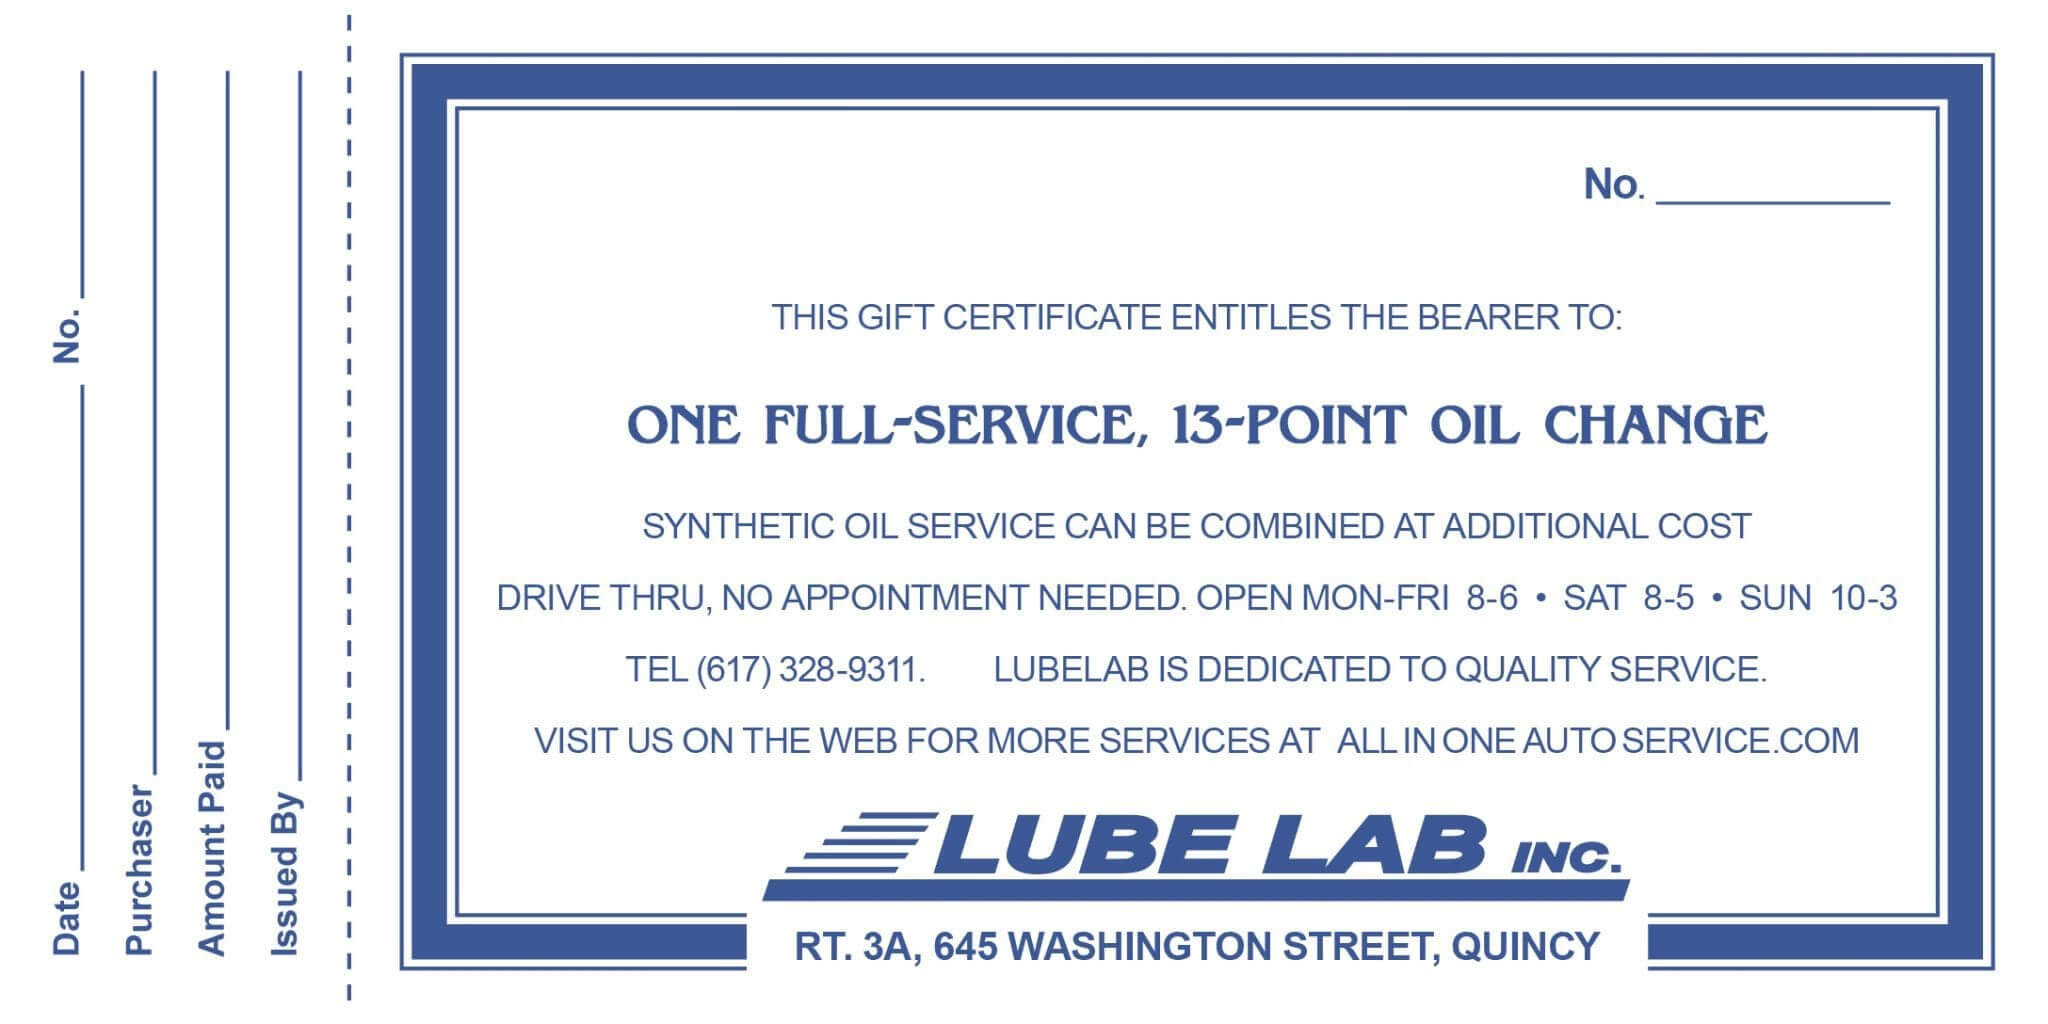 Full Service, 13 Point Oil Change | All In One & Lube Lab With Regard To This Certificate Entitles The Bearer Template